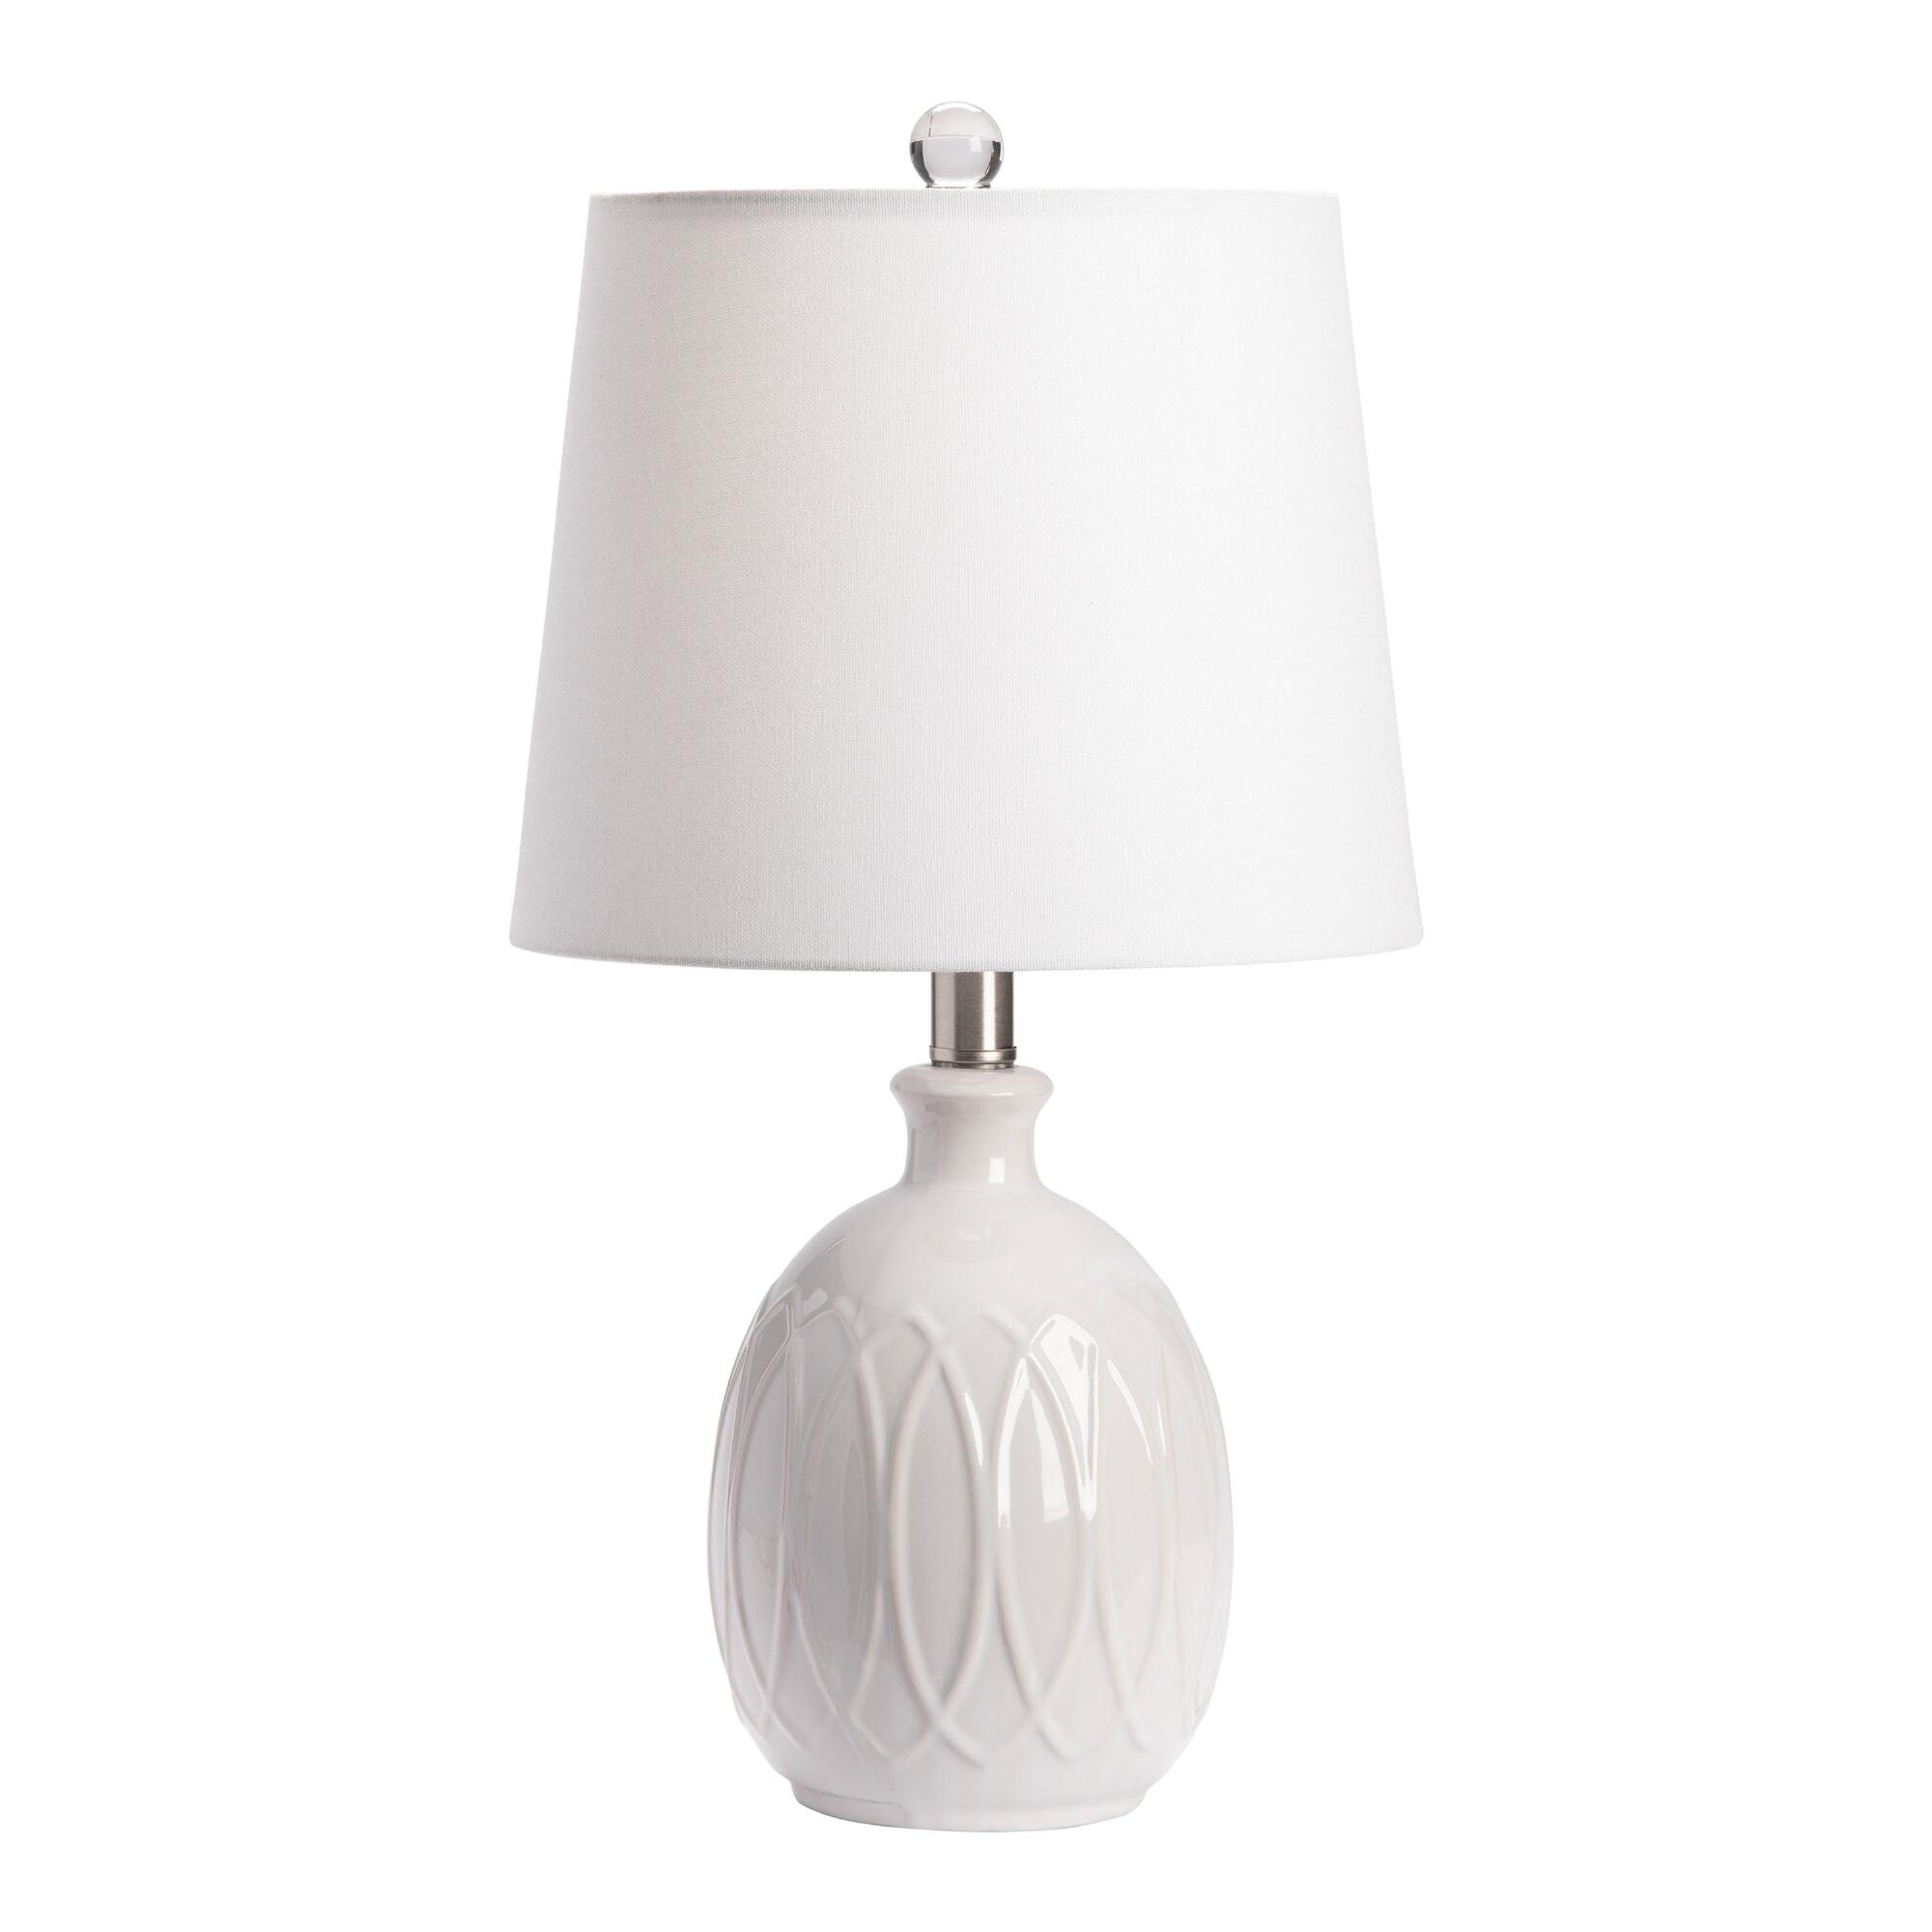 White Ceramic Geometric Willet Table Lamp by World Market